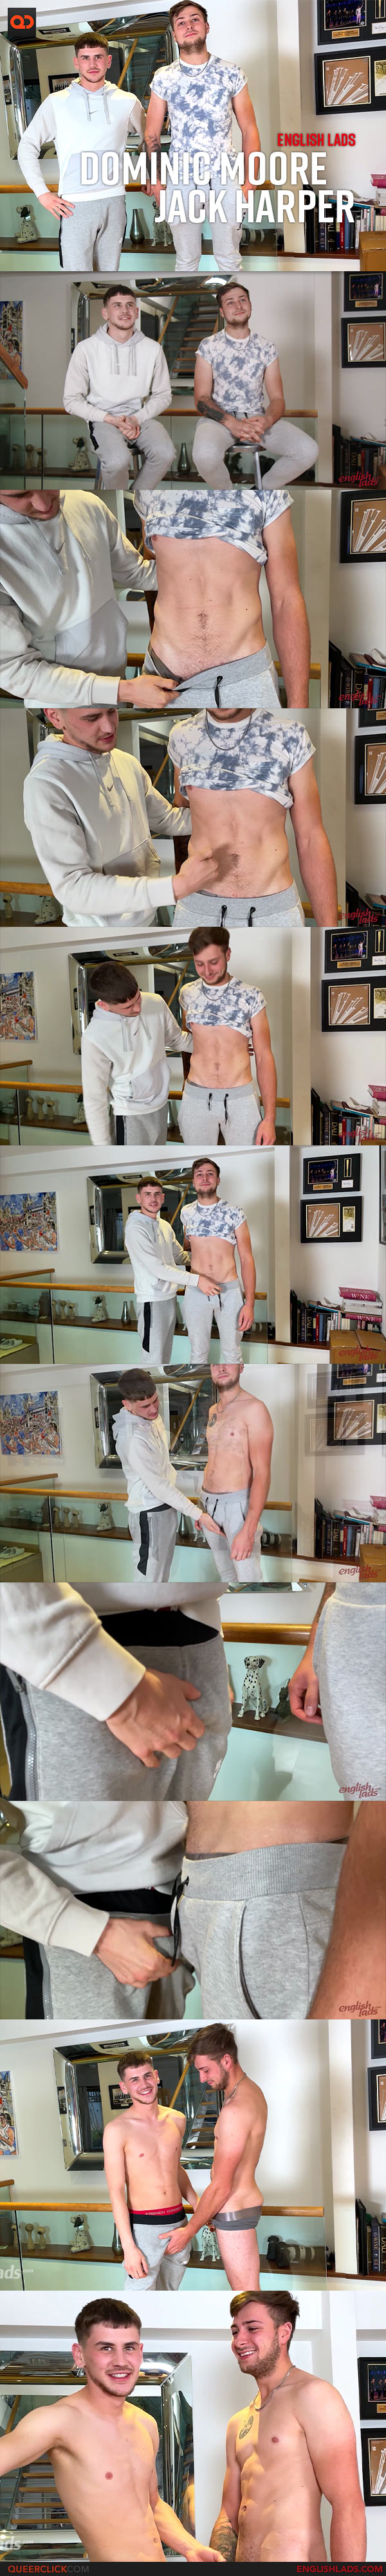 English Lads: Straight Lads Dominic Moore and Jack Harper Wank and Suck Each Other's Big Hard Uncut Cocks